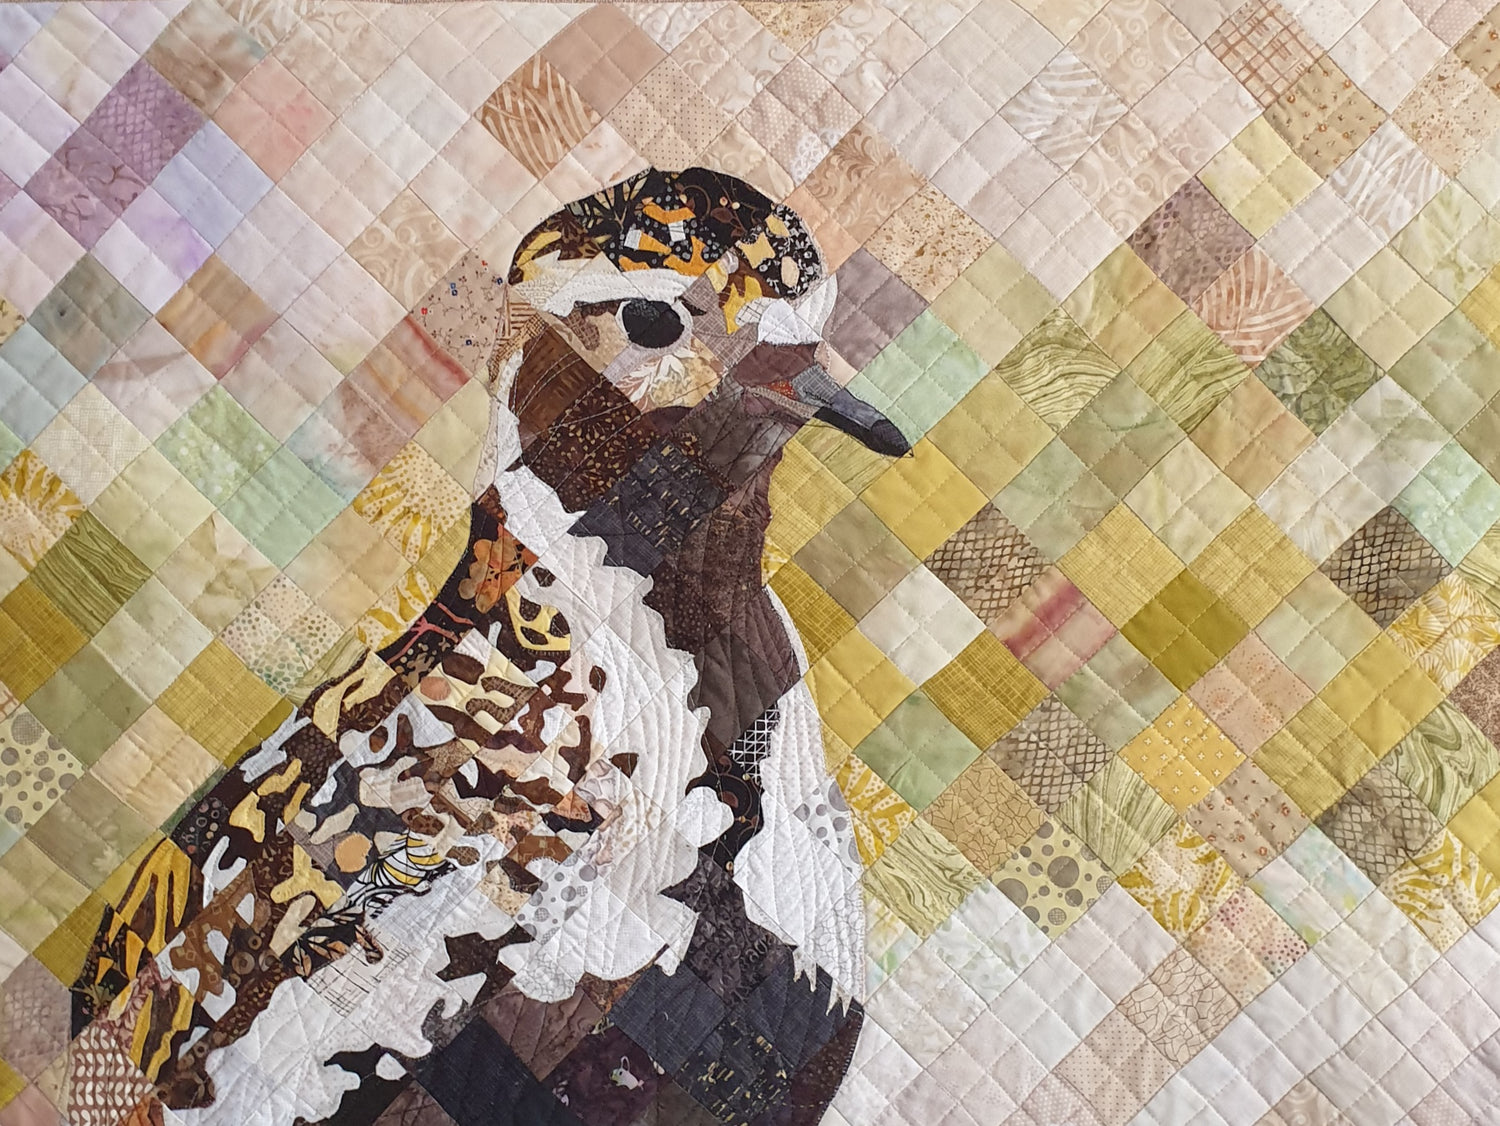 The Golden Plover has arrived Quilt by Dröfn Teitsdóttir from 2021. Greeting cards, posters and postcards. kashima.is